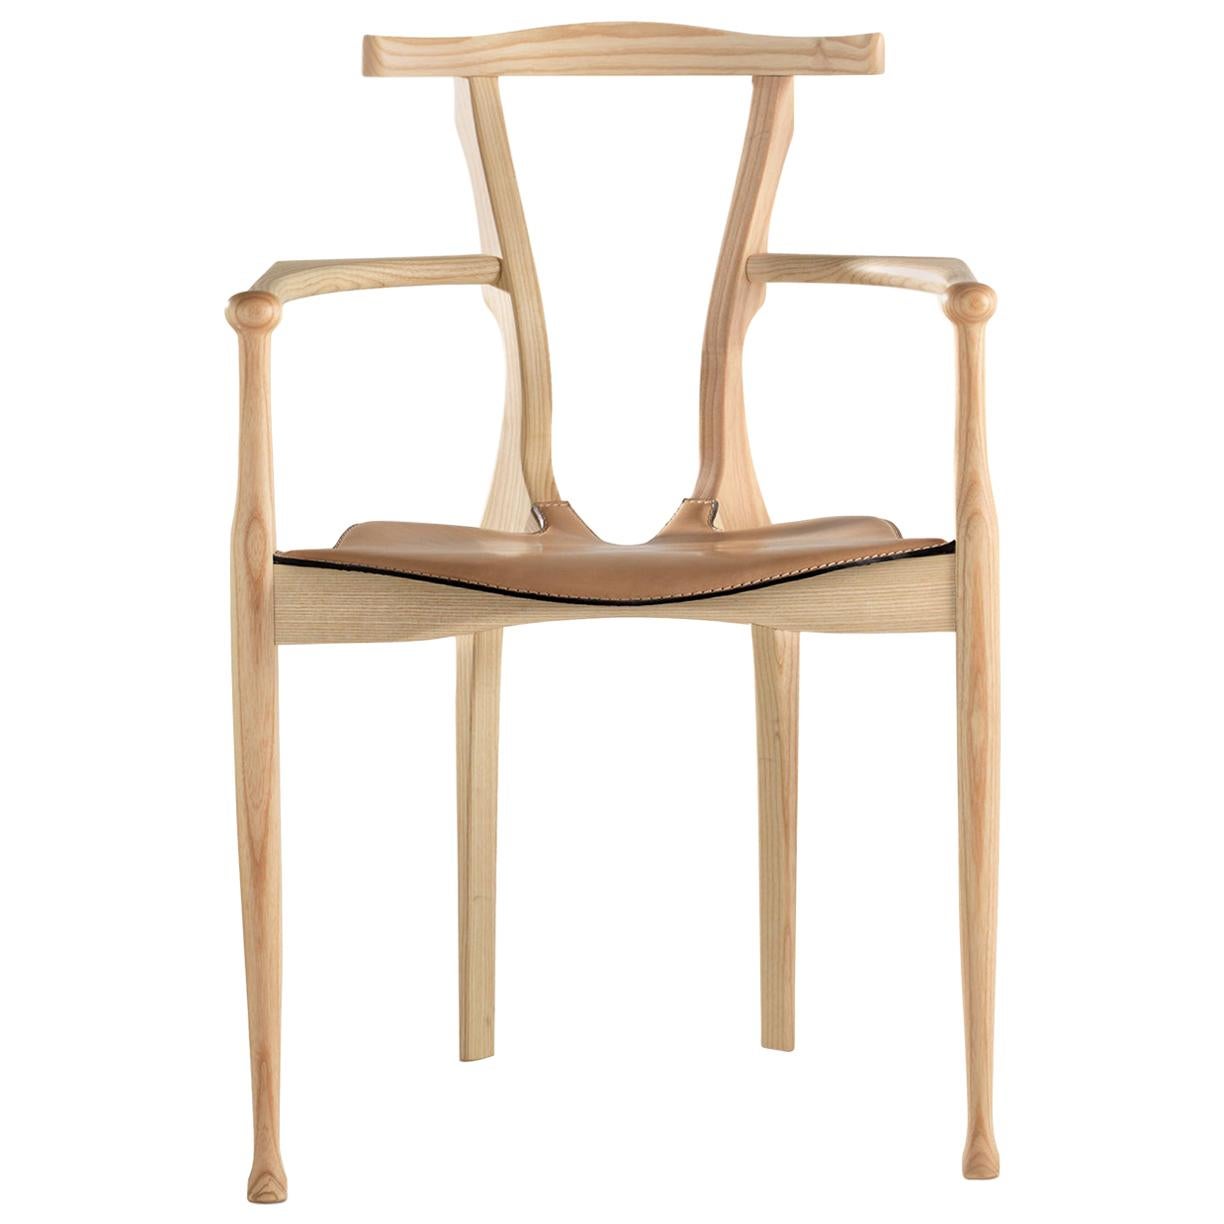 Gaulino dining chair by Oscar Tusquets, Spanish contemporary design natural ash